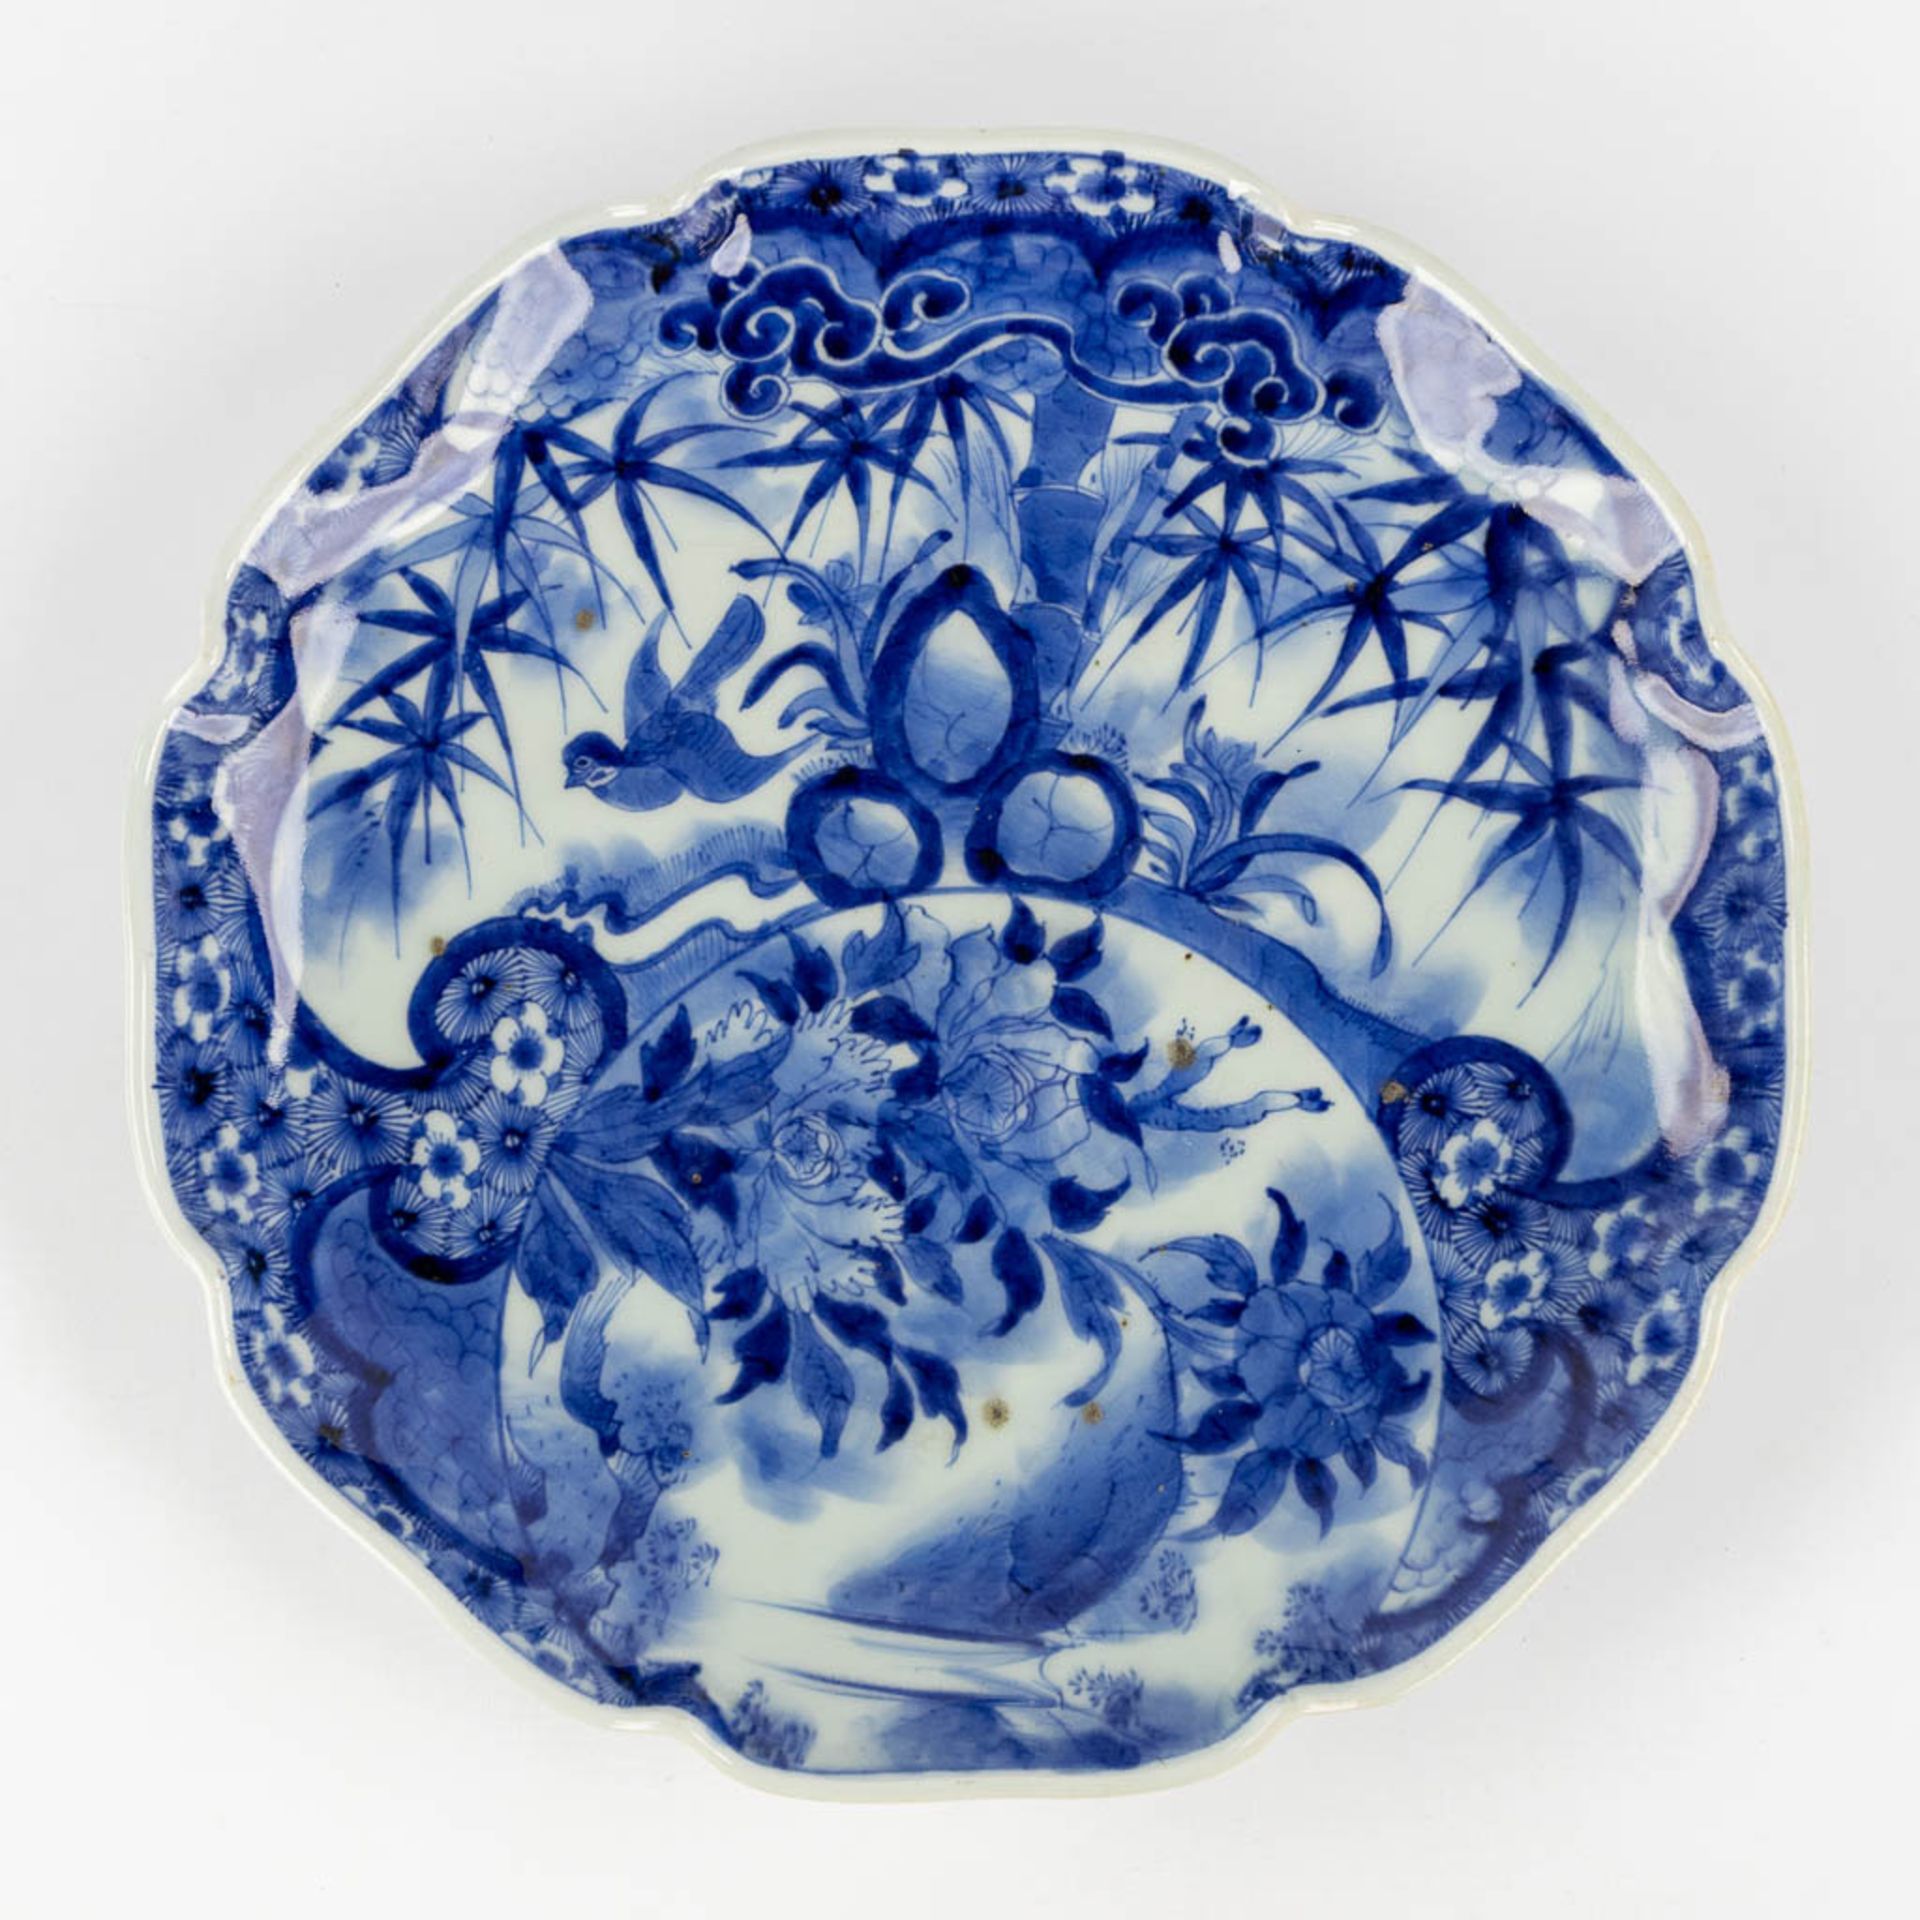 Two Japanese Imari and blue-white plates. 19th/20th C. (D:46 cm) - Image 9 of 14